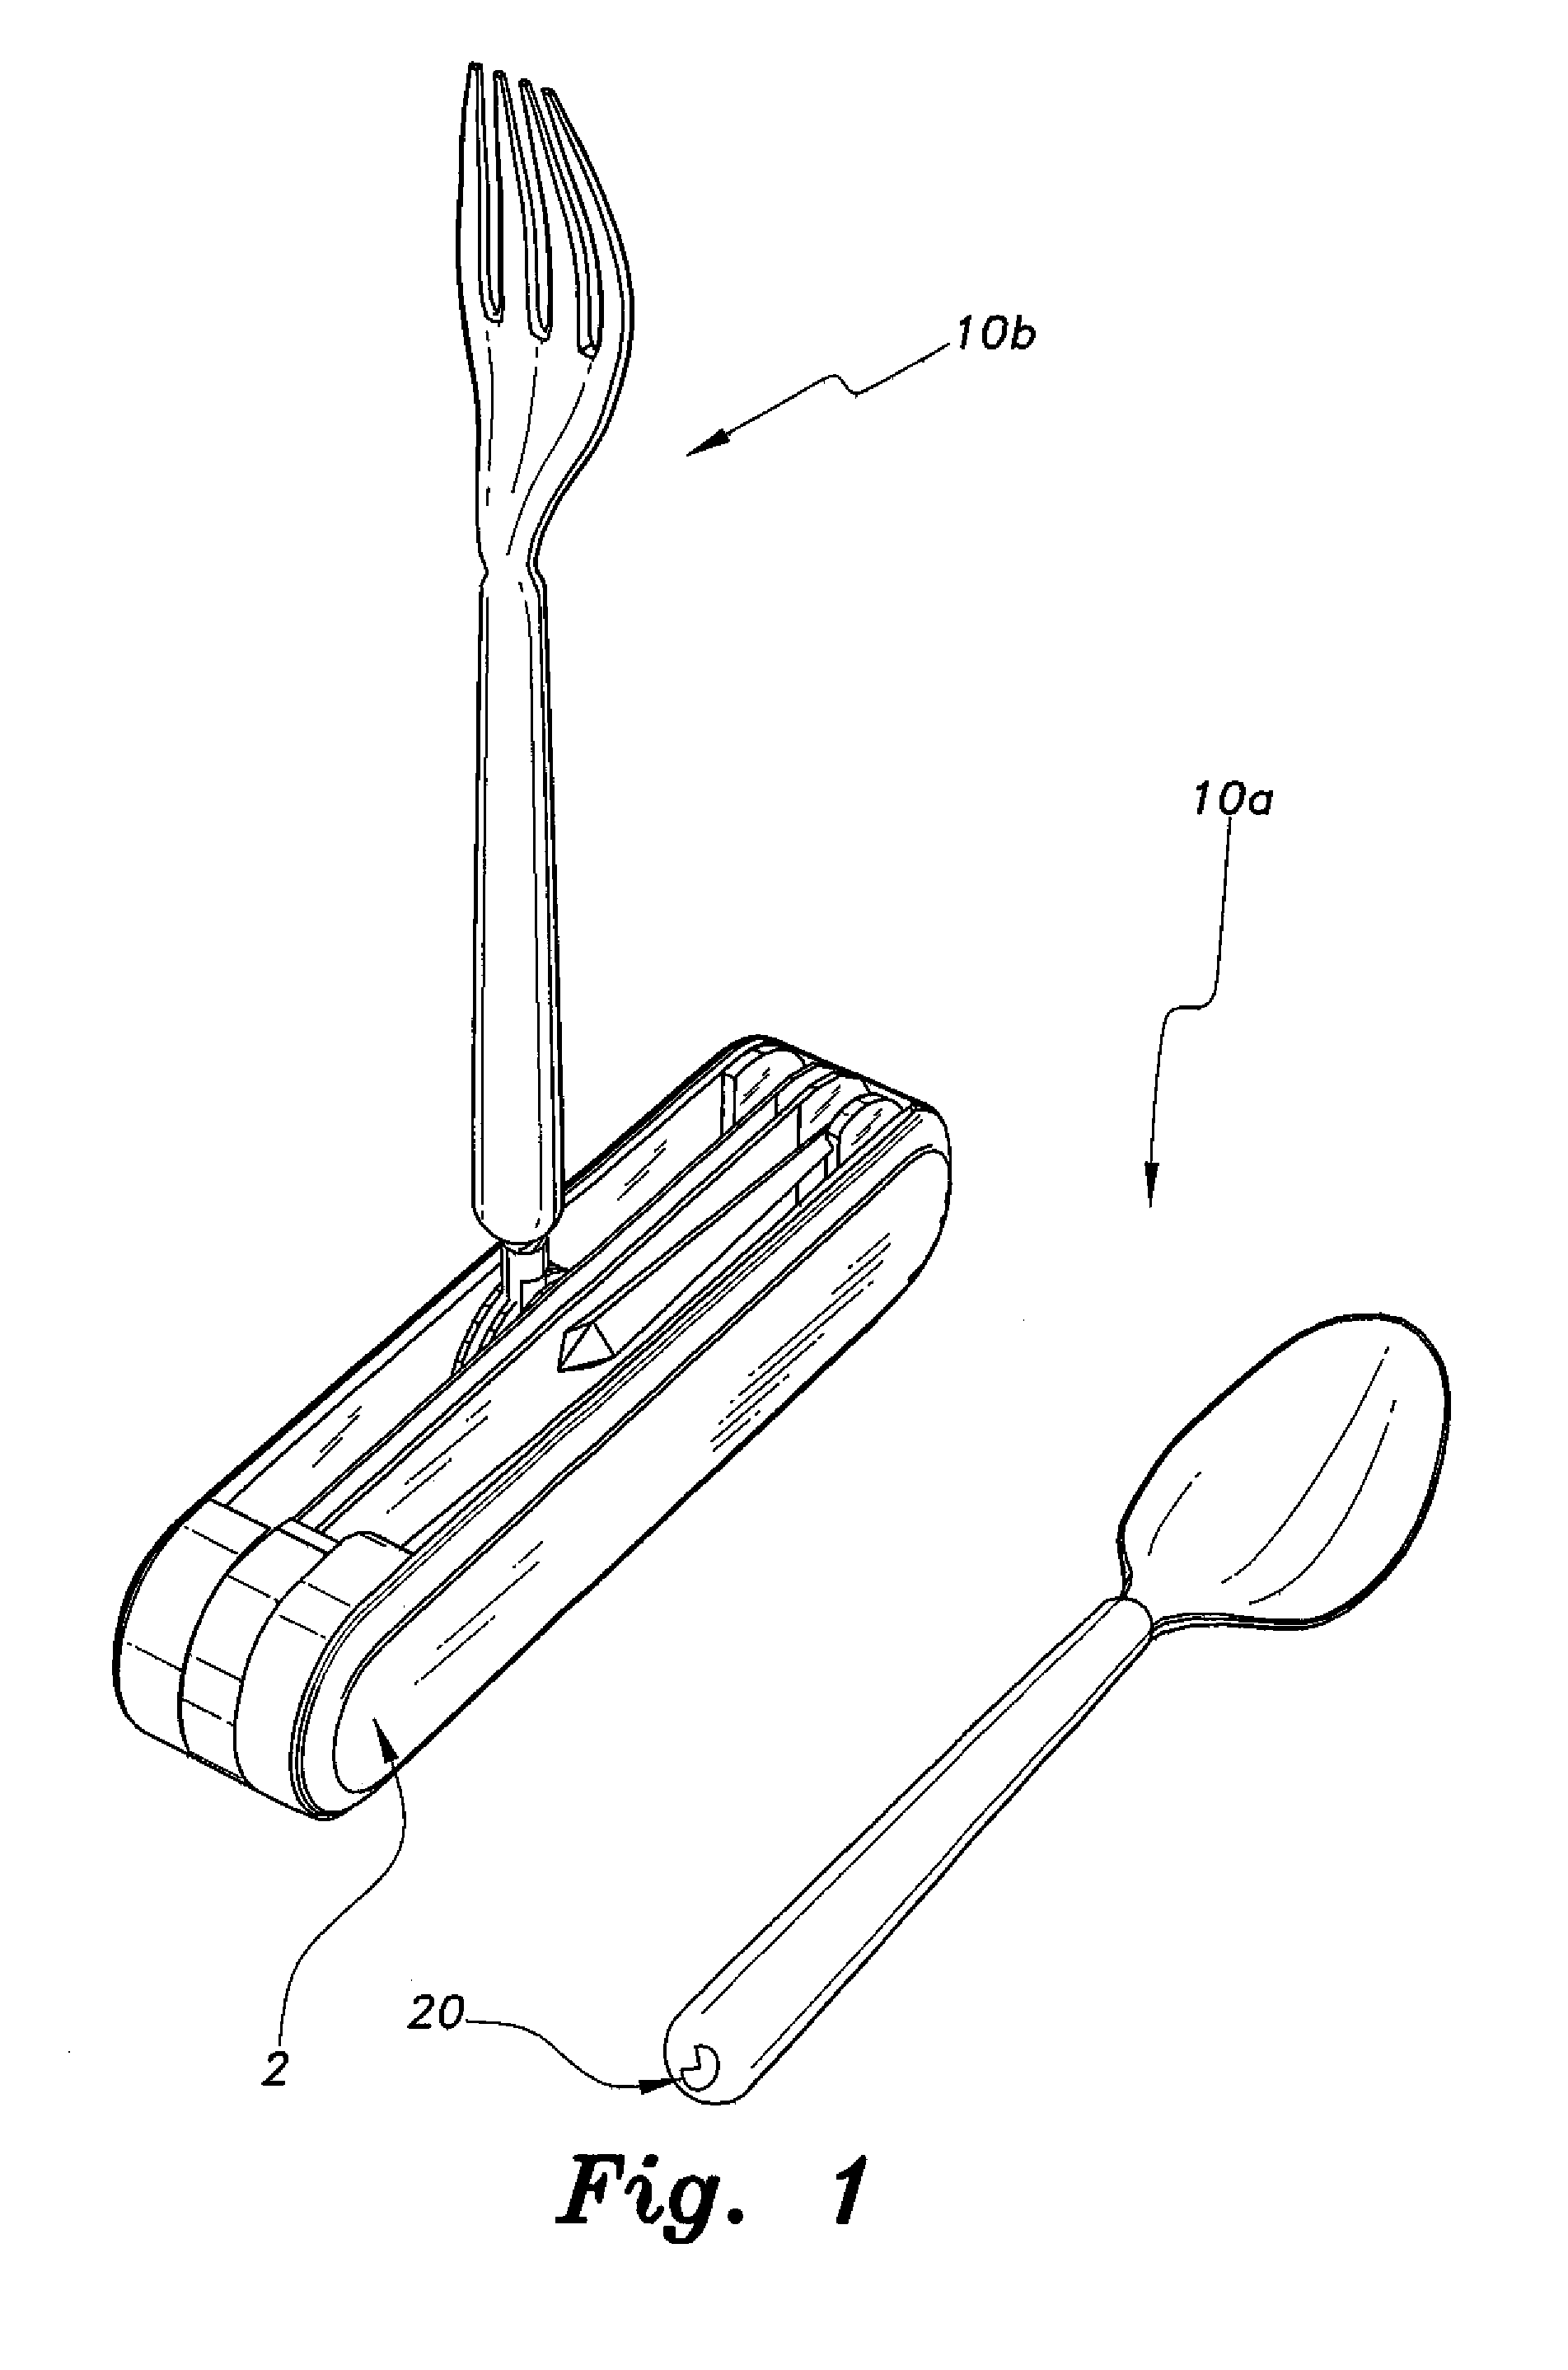 Utensil attachments for portable knife assembly